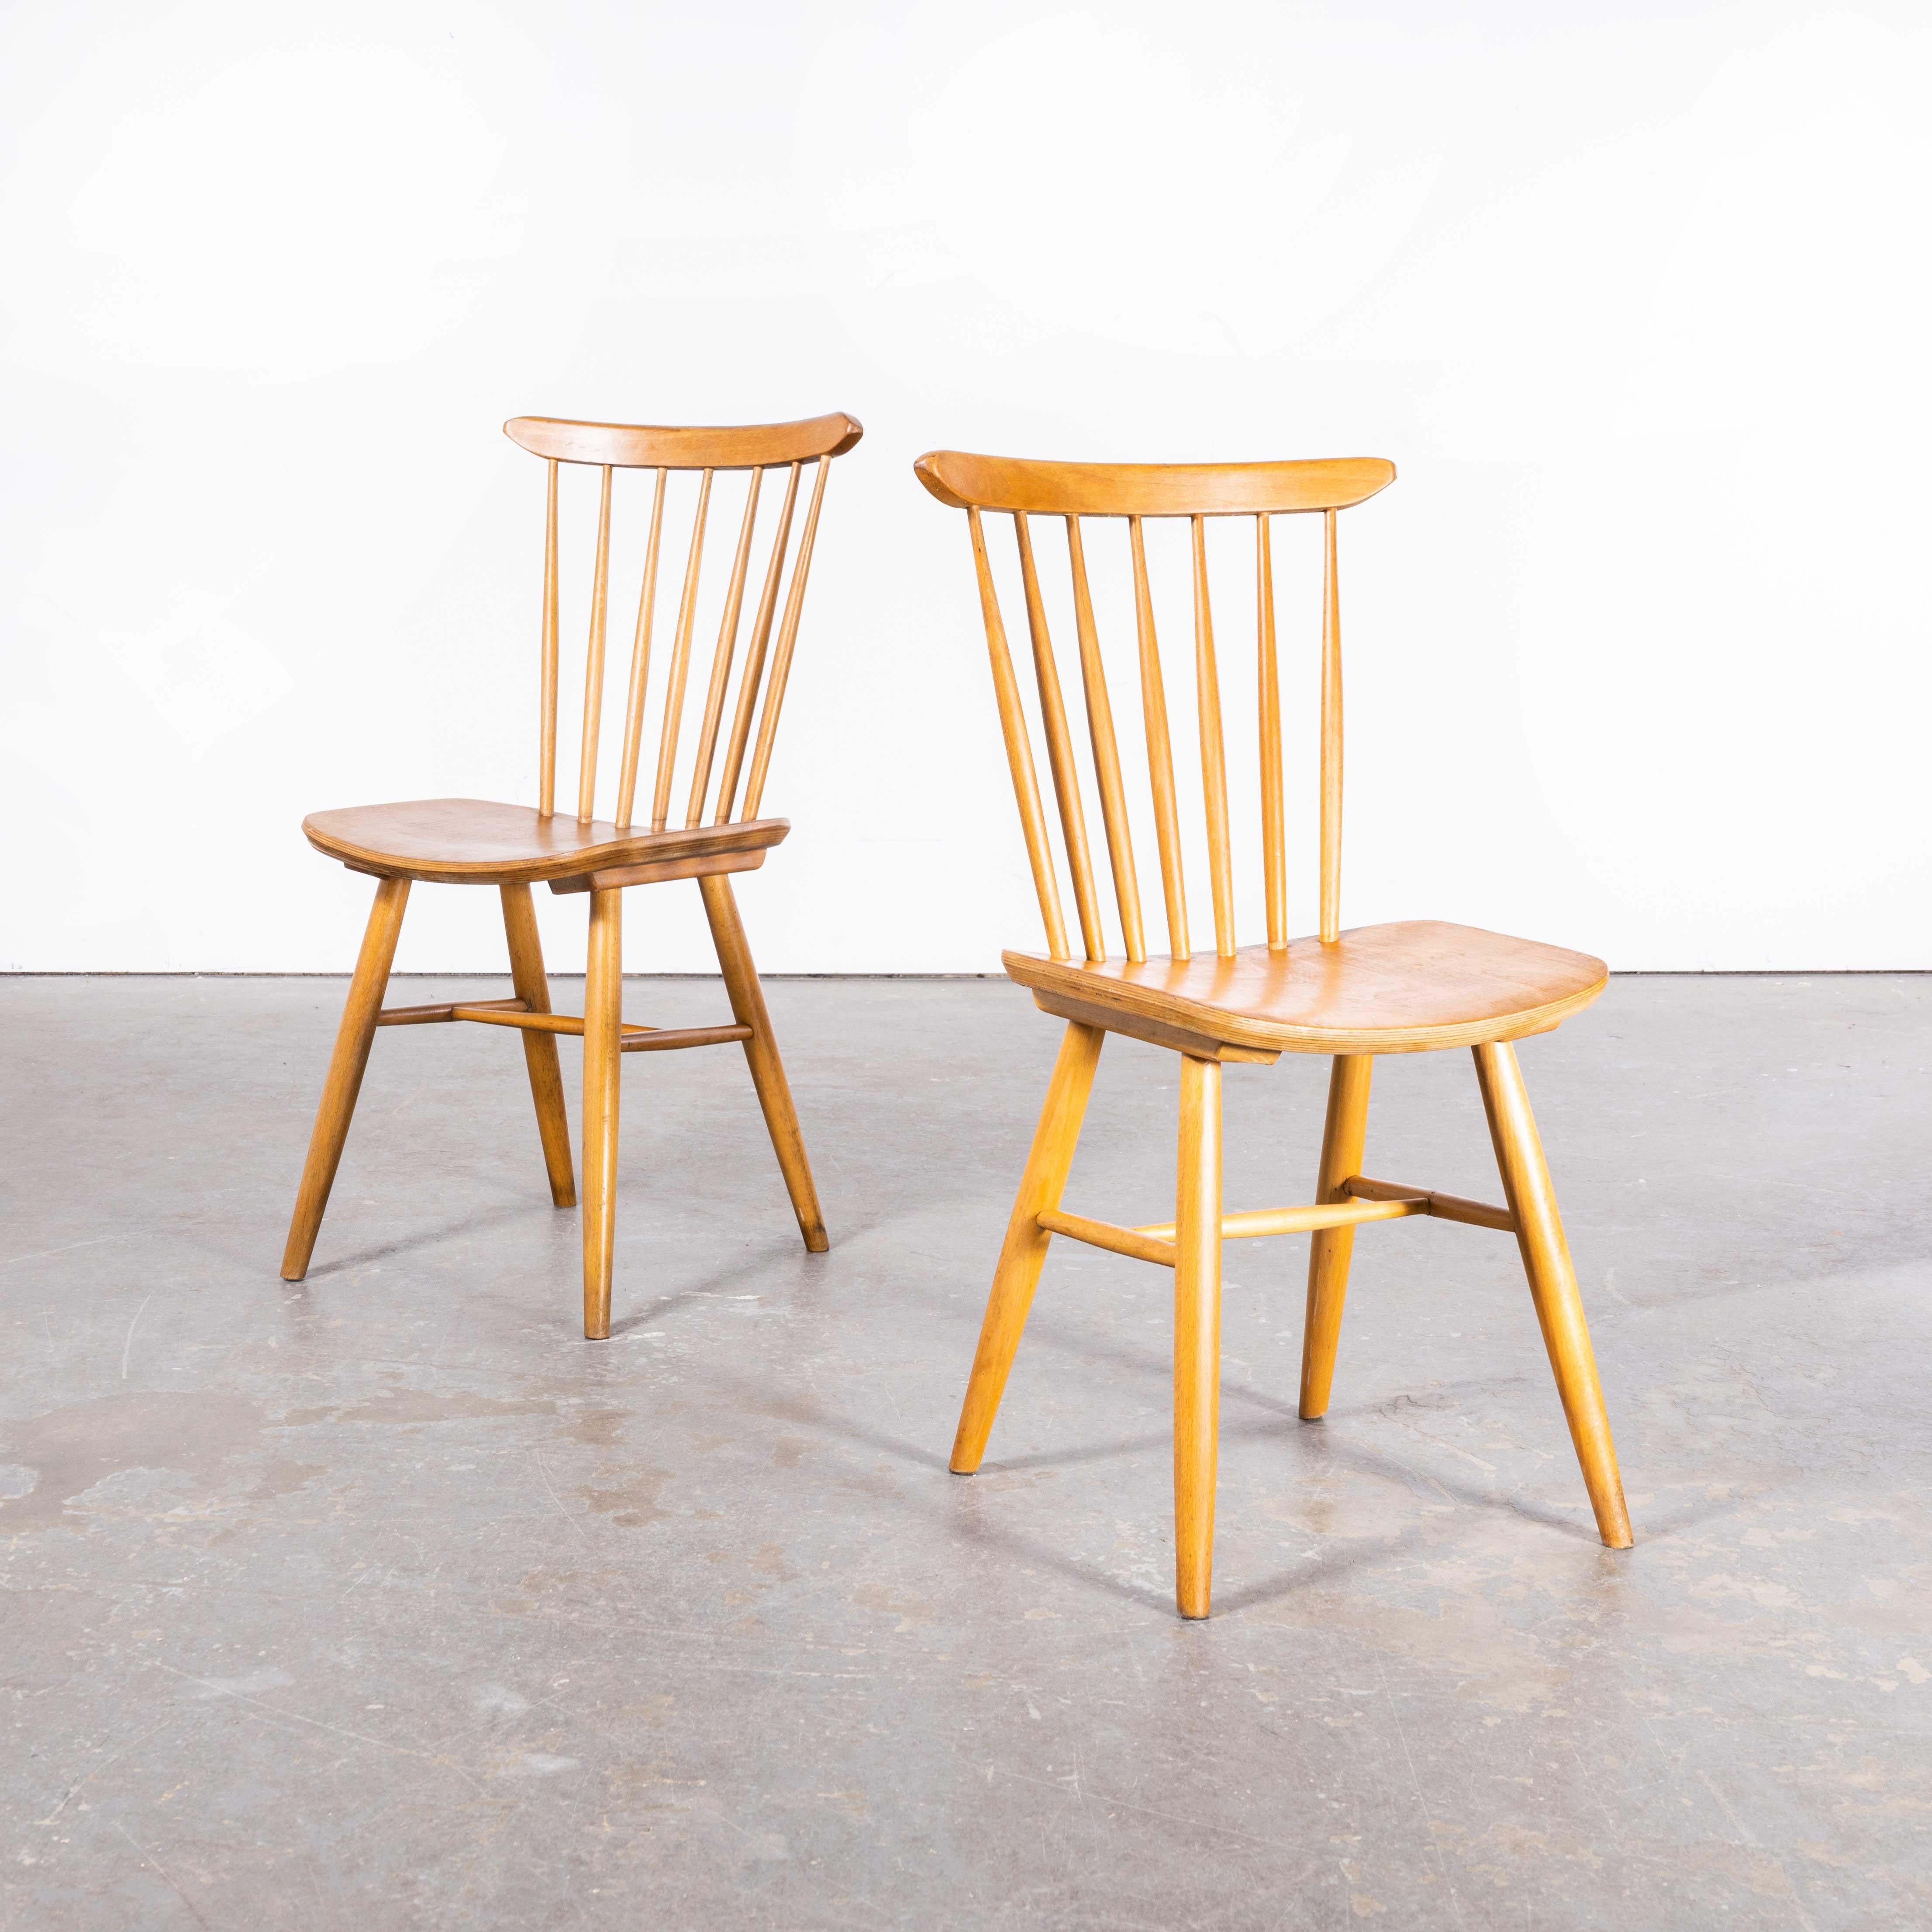 1950 Honey Oak Stickback Chairs, Saddle Seat, by Ton, Pair In Good Condition For Sale In Hook, Hampshire